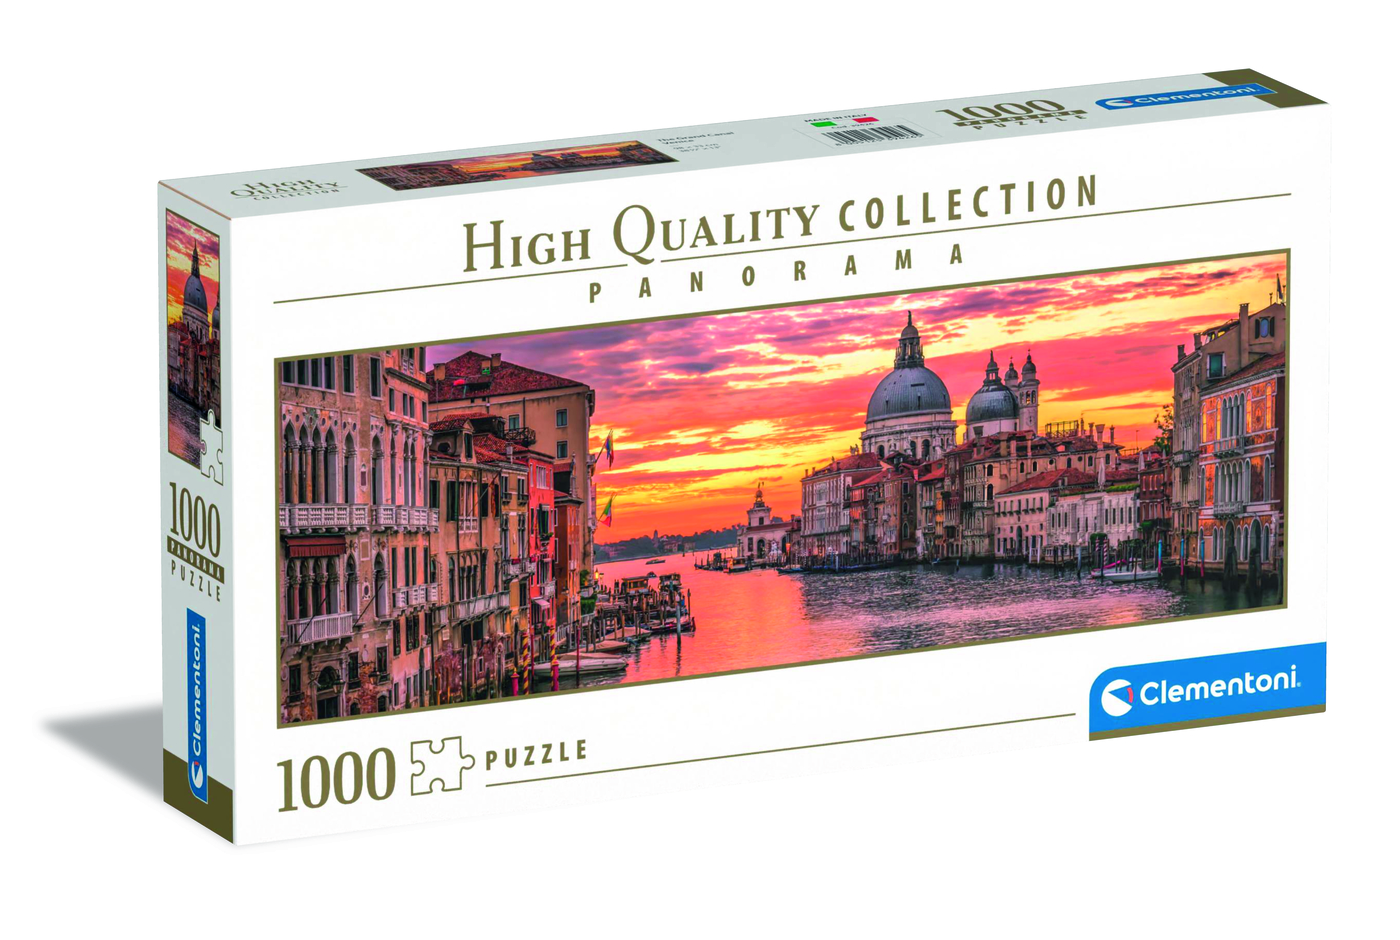 The Gand Canal - Venice - el. Panorama Puzzle -